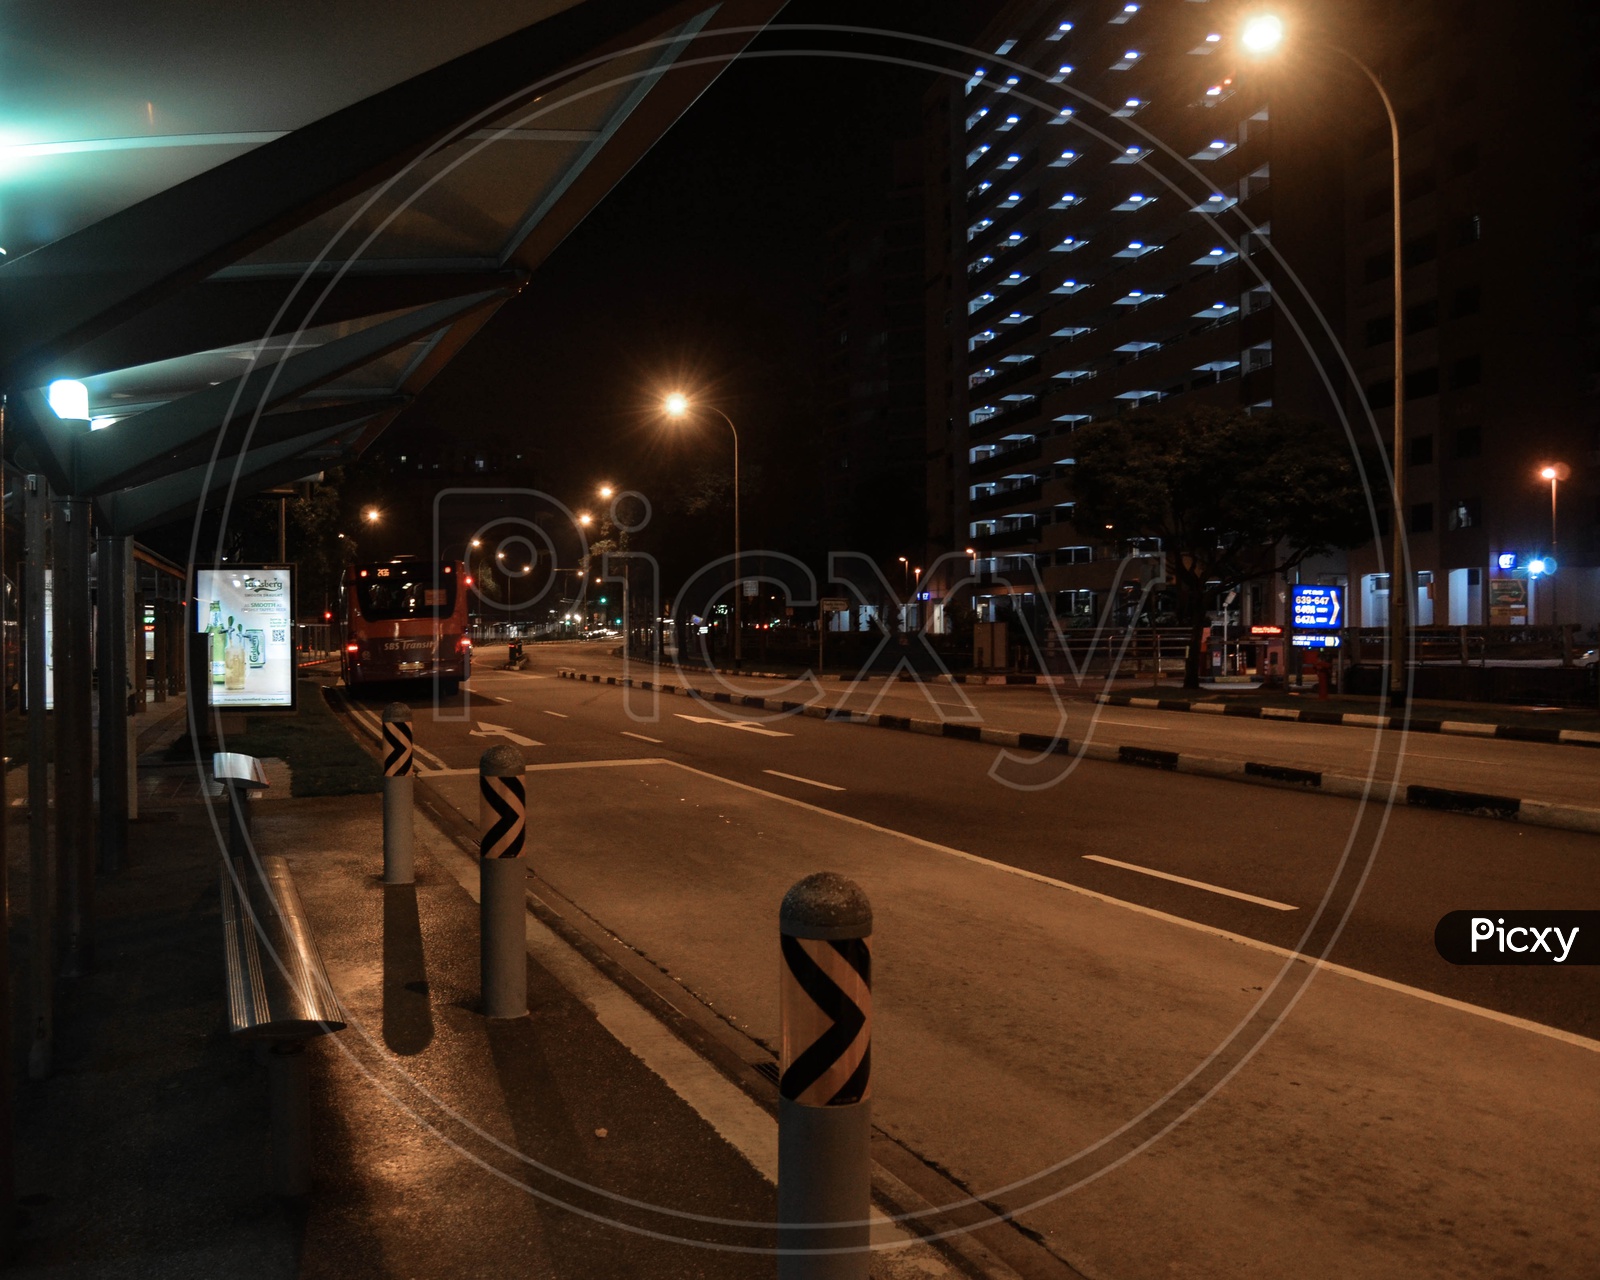 Bus stop view in Singapore at night